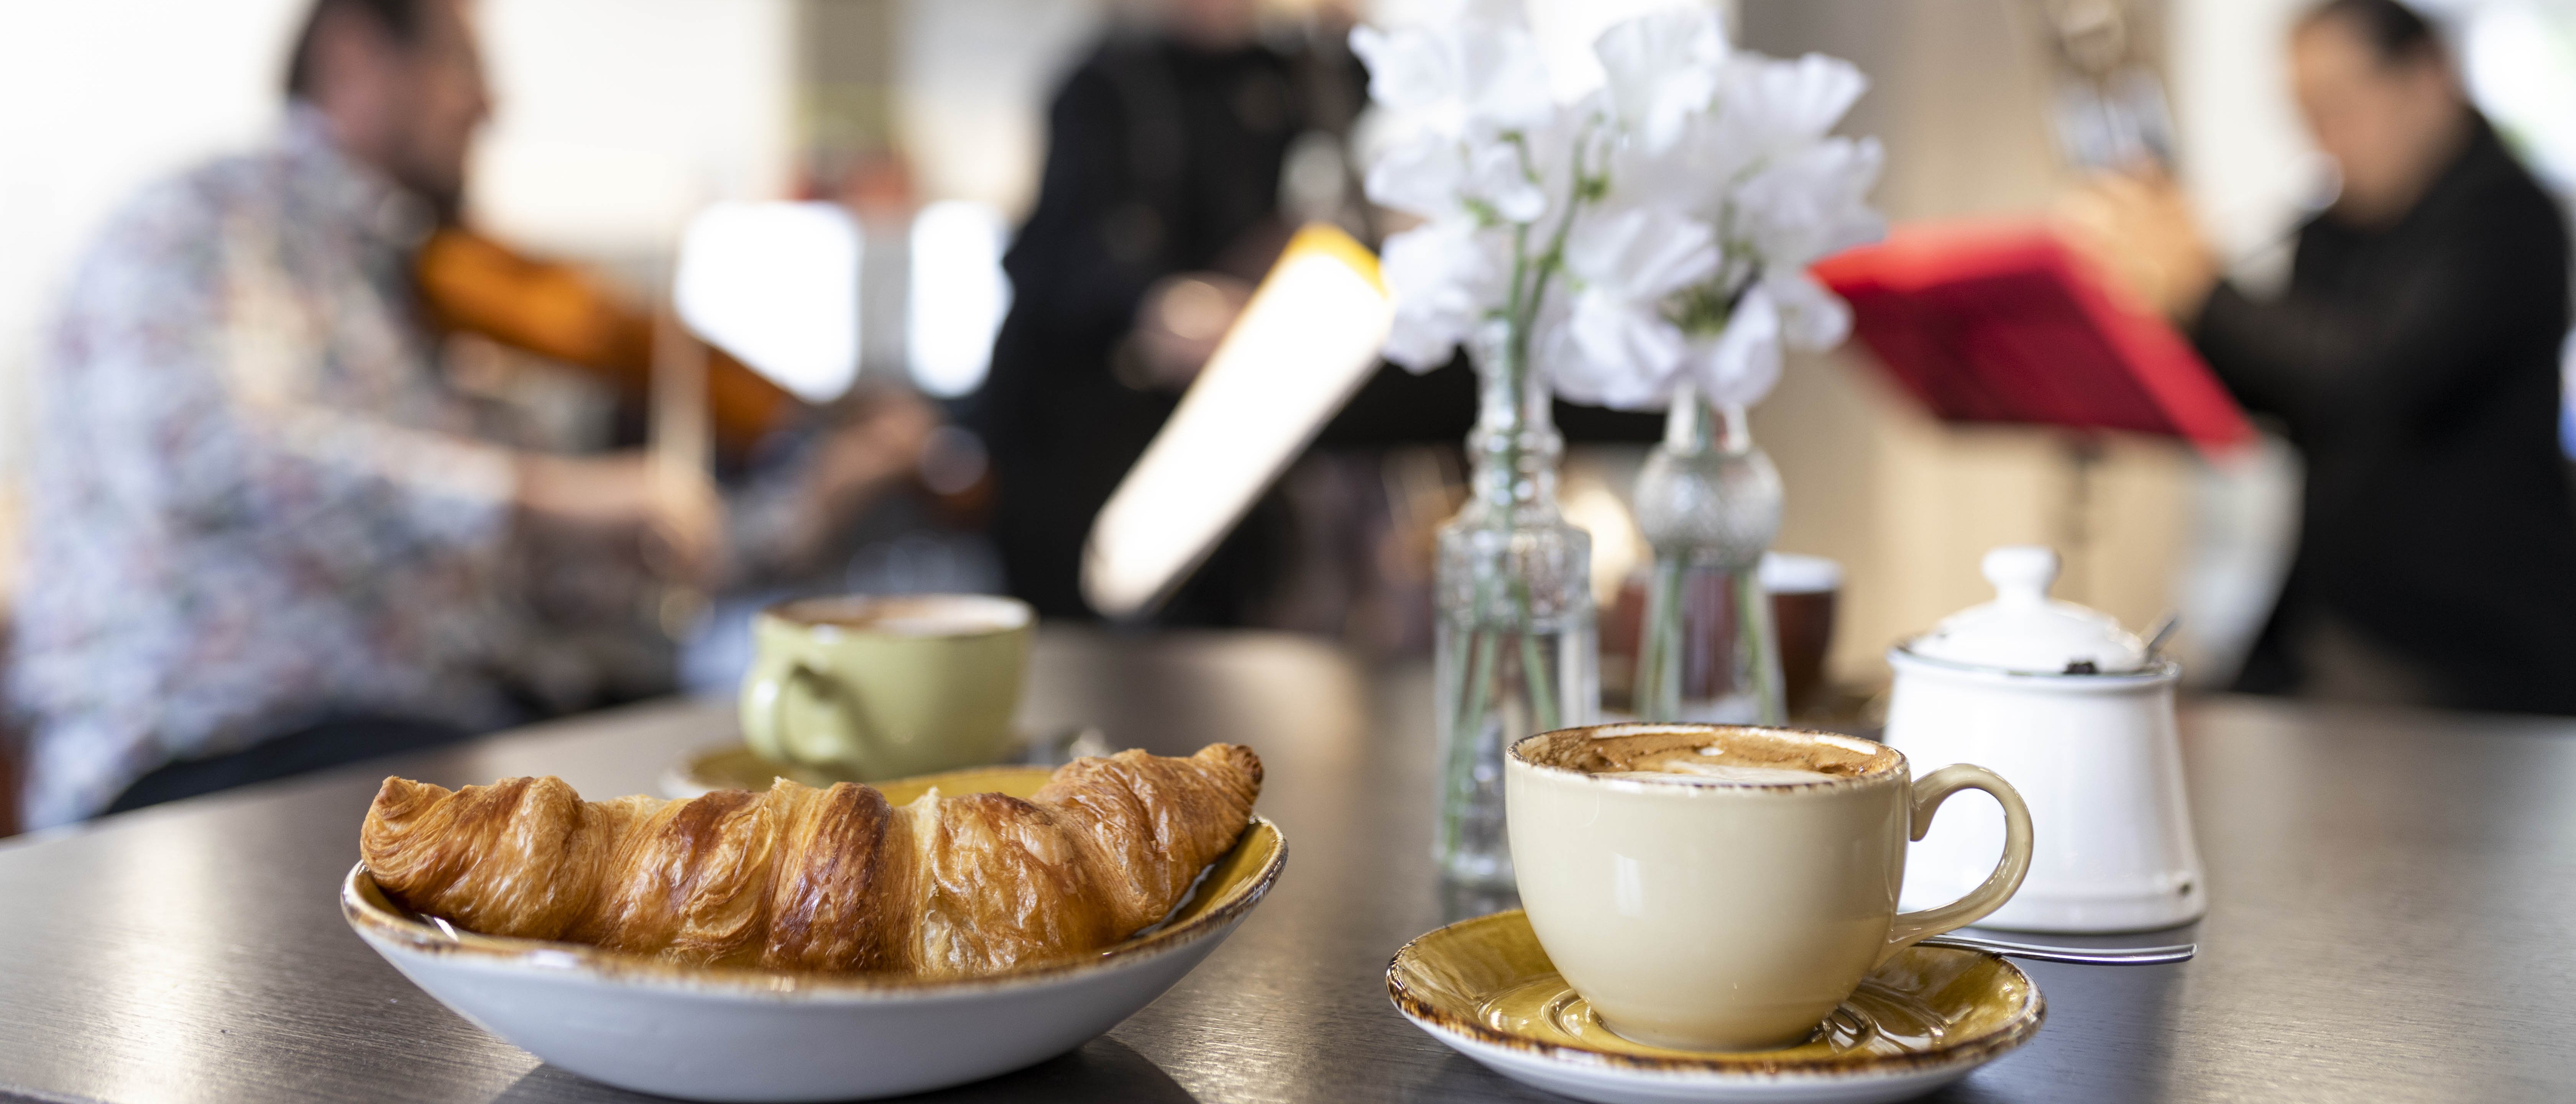 Croissant and coffee on a table, musicians play in the background